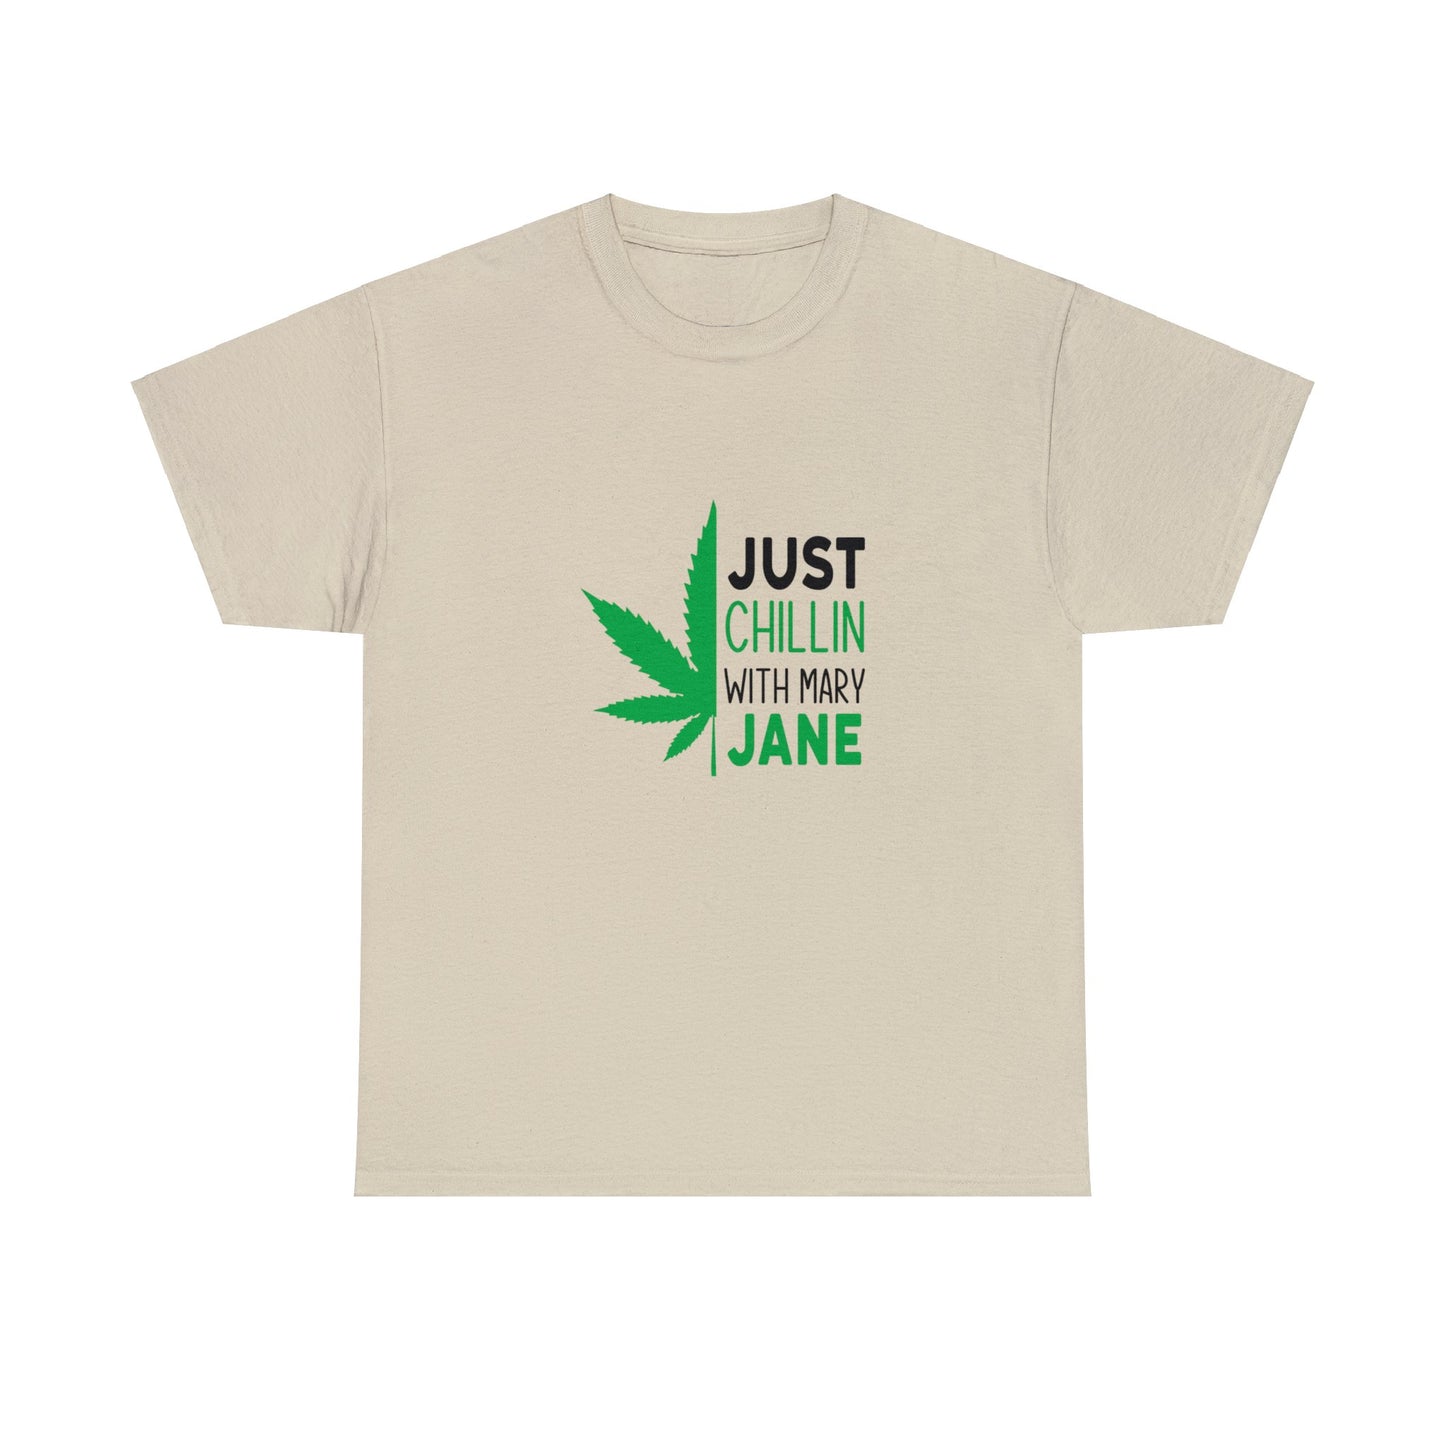 Just Chilling With Mary Jane | Cotton Tee | Unisex Sizing